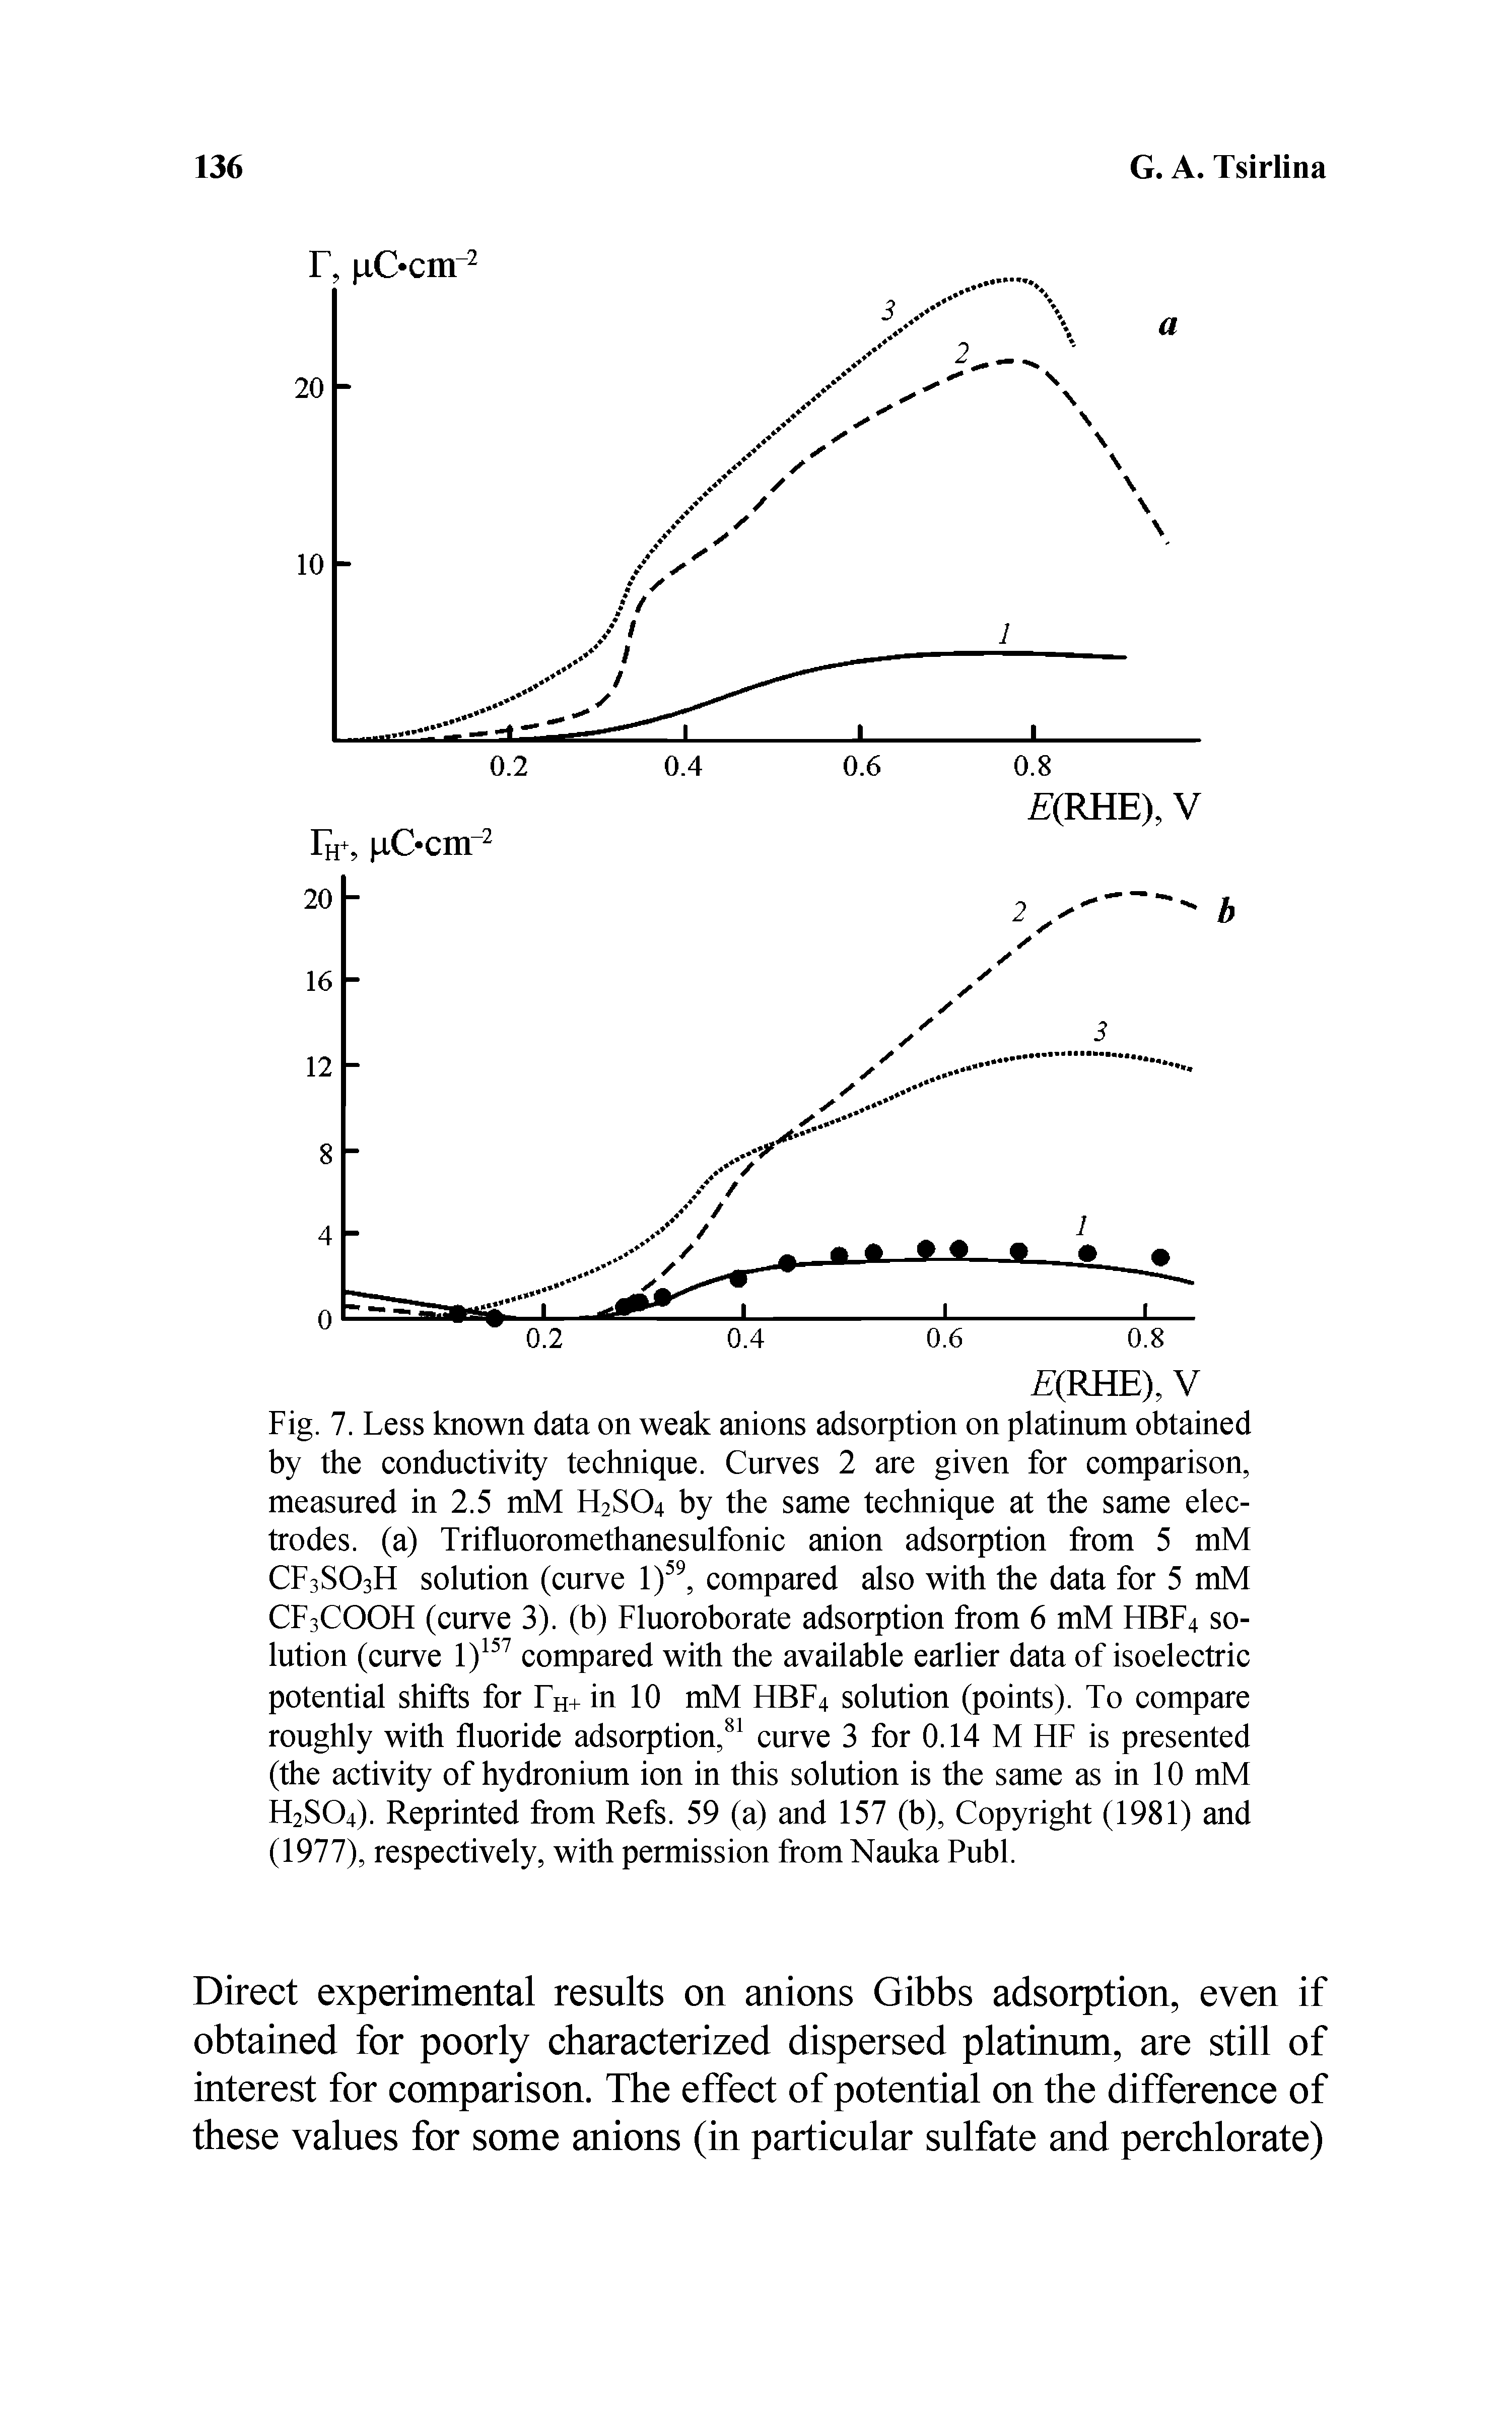 Fig. 7. Less known data on weak anions adsorption on platinum obtained by the conductivity technique. Curves 2 are given for comparison, measured in 2.5 mM H2SO4 by the same technique at the same electrodes. (a) Trifluoromethanesulfonic anion adsorption from 5 mM CF3SO3H solution (curve 1), compared also with the data for 5 mM CF3COOH (curve 3). (b) Fluoroborate adsorption from 6 mM HBF4 solution (curve 1) compared with the available earlier data of isoelectric potential shifts for Fh+ in 10 mM HBF4 solution (points). To compare roughly with fluoride adsorption,curve 3 for 0.14 M HF is presented (the activity of hydronium ion in this solution is the same as in 10 mM H2SO4). Reprinted from Refs. 59 (a) and 157 (b). Copyright (1981) and (1977), respectively, with permission from Nauka Publ.